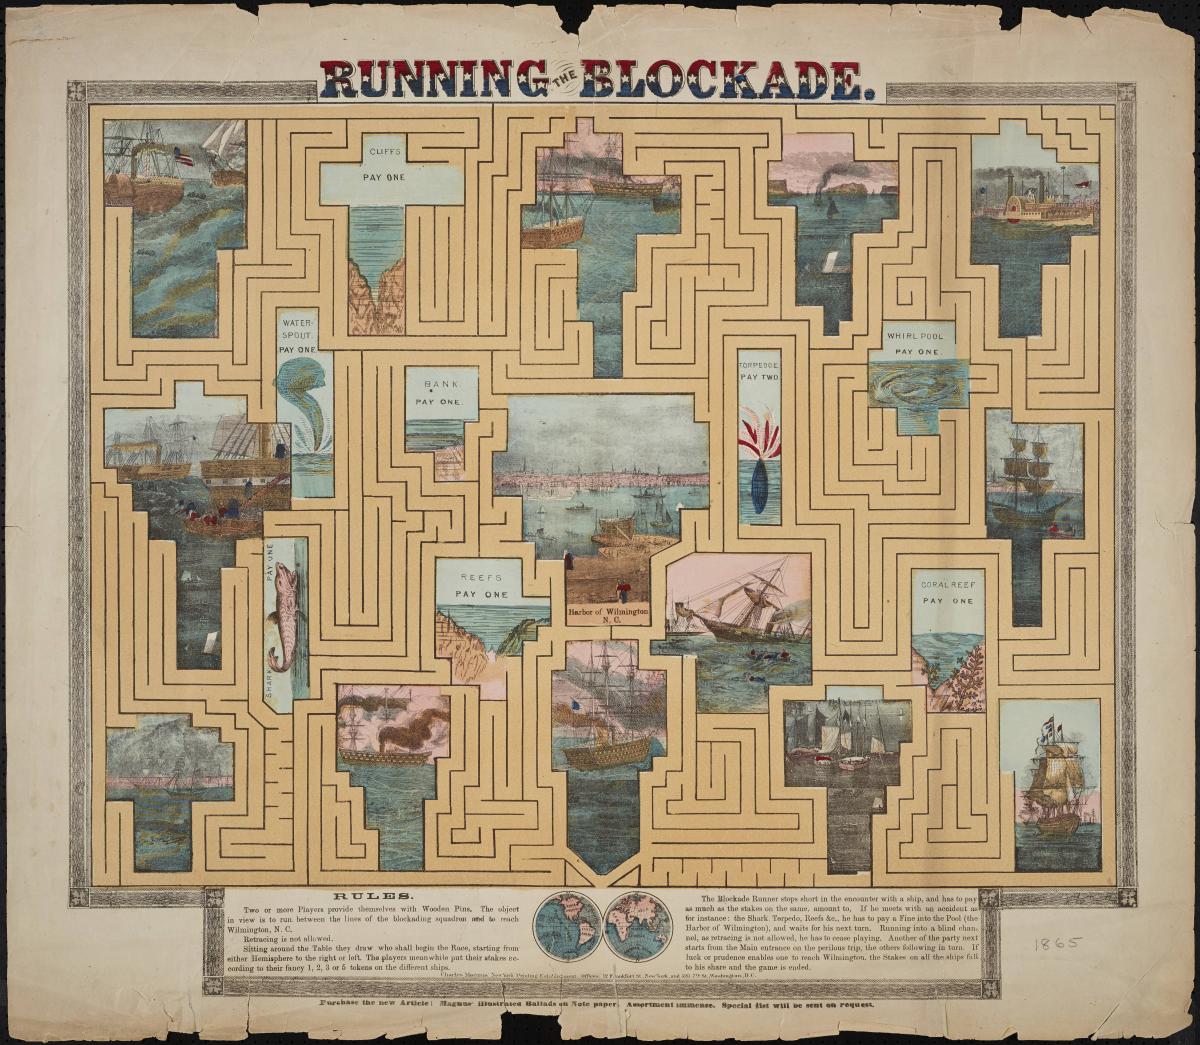 Image of "Running the Blockade", a Board Game